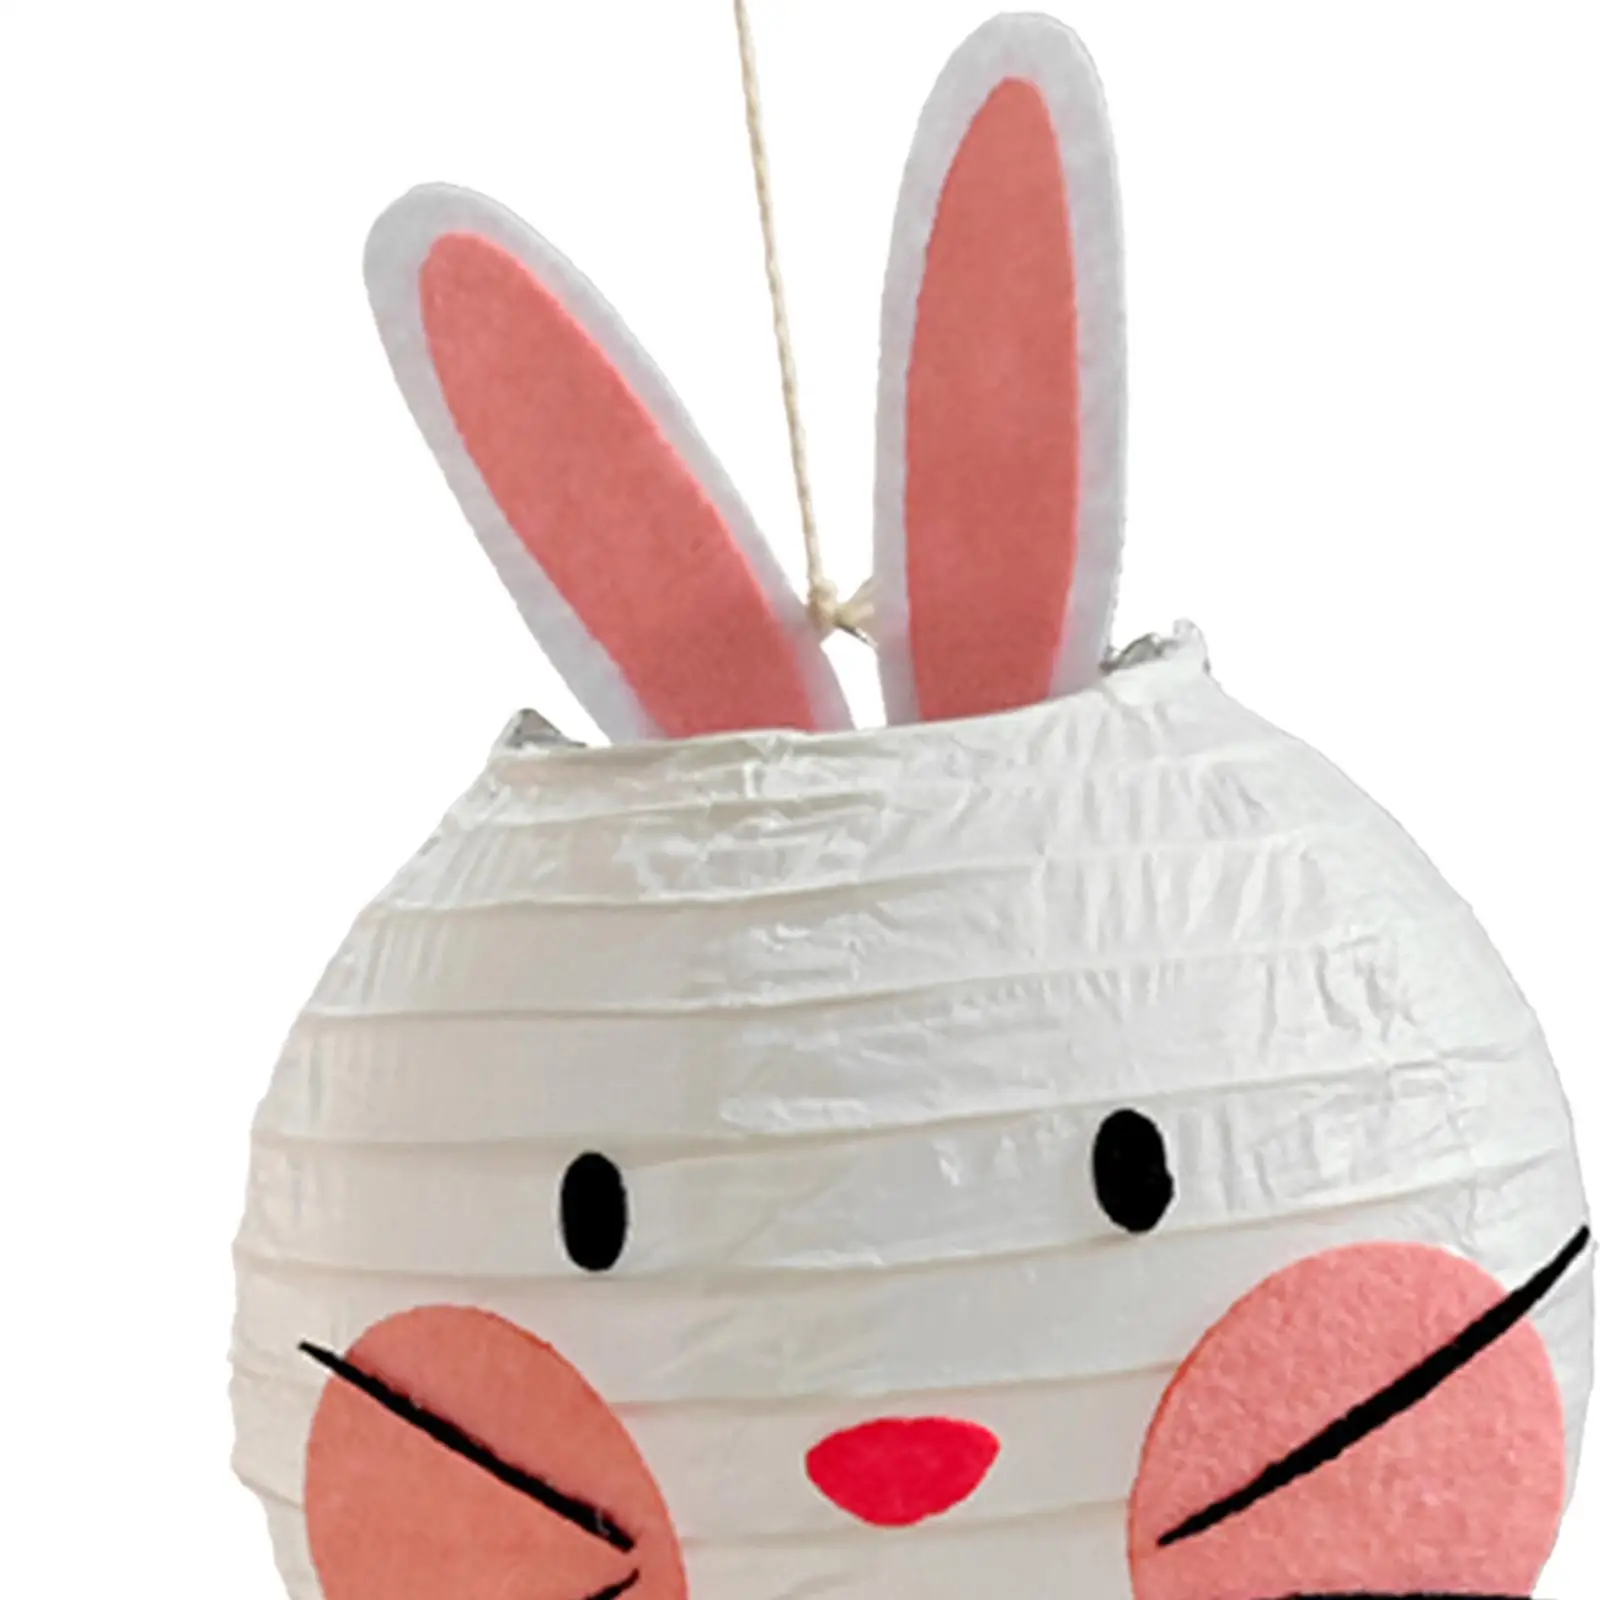 Easter Bunny Lantern Hanging Paper Lanterns Decorative for Wedding Birthday Celebration Holiday Party Favors